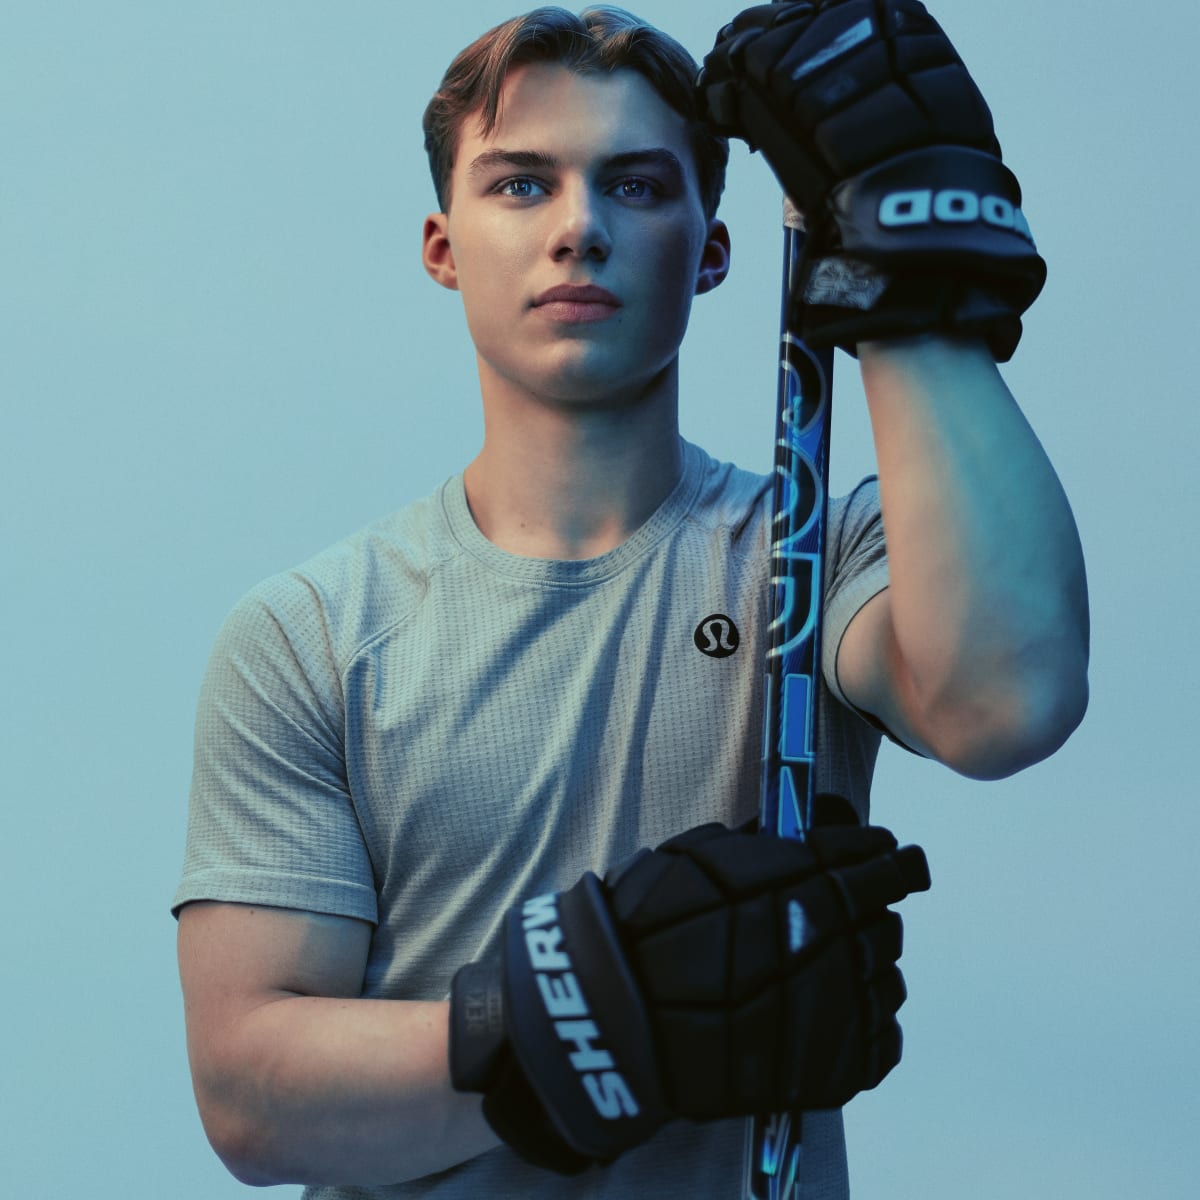 Connor Bedard signs with lululemon - The Chicago Blackhawks